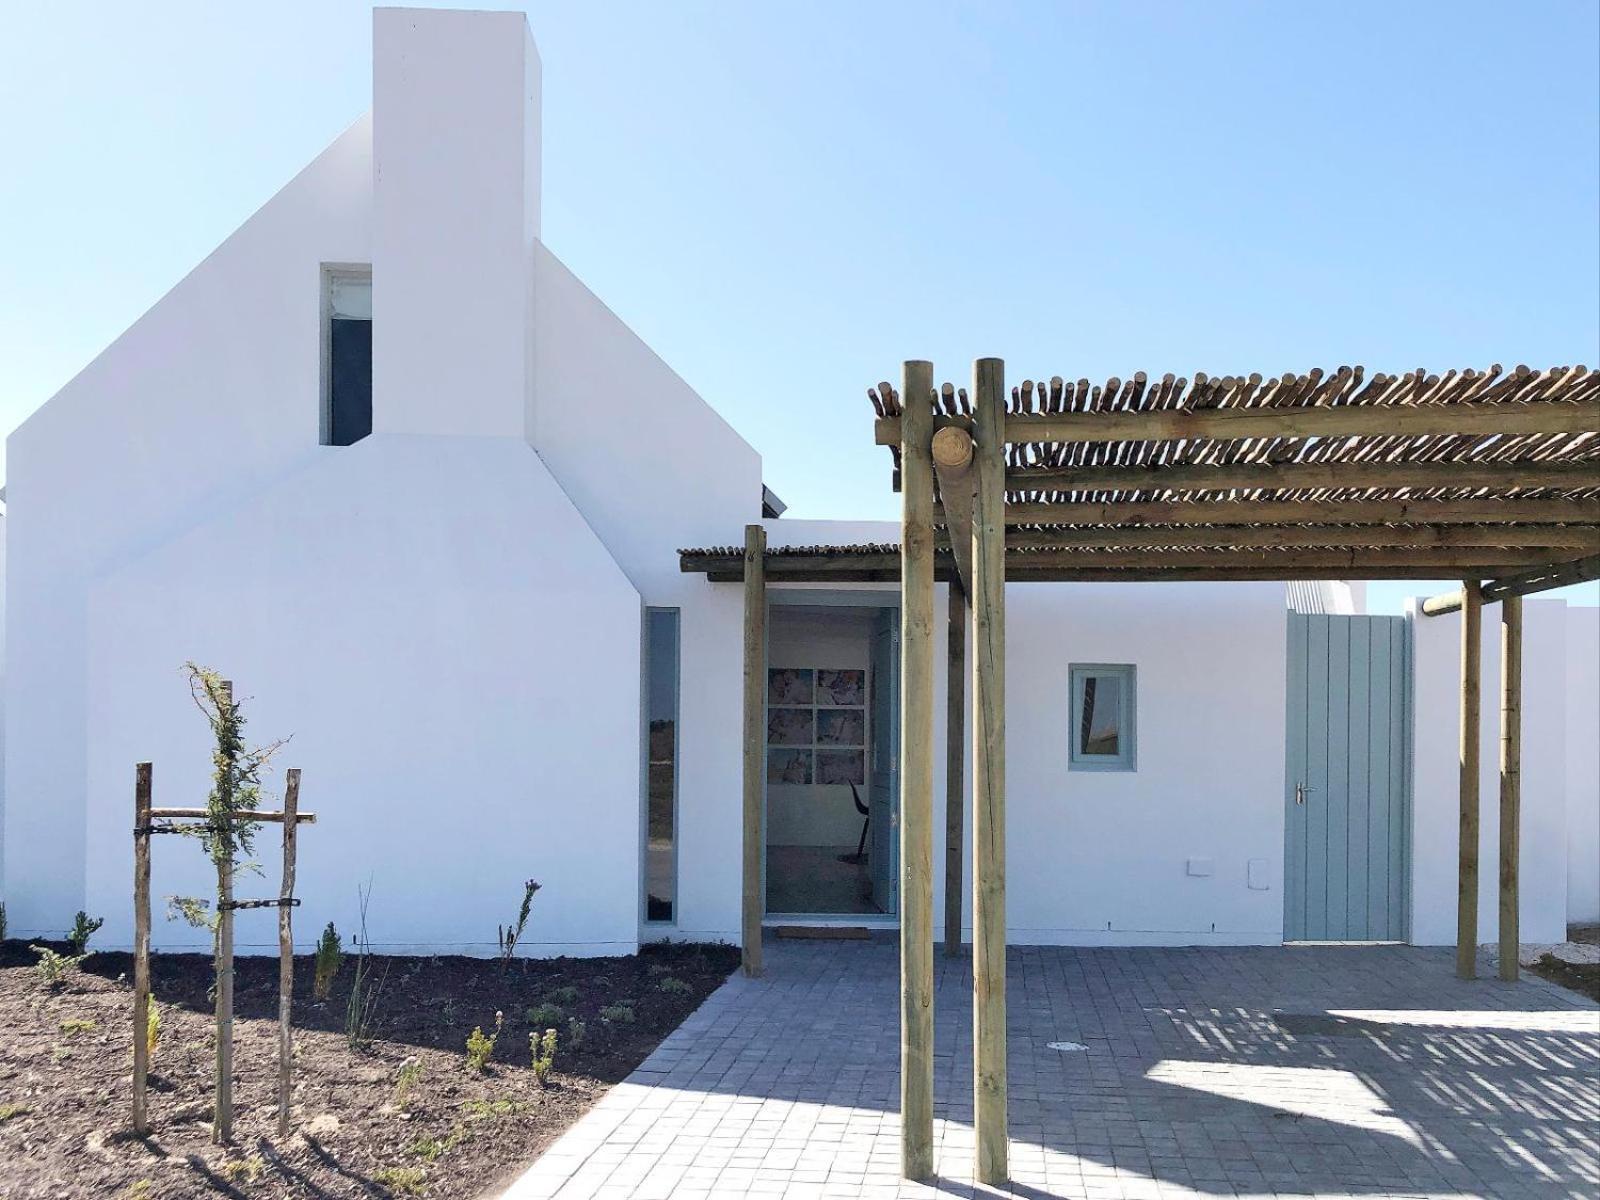 The Cottage Collection Paternoster Exterior photo